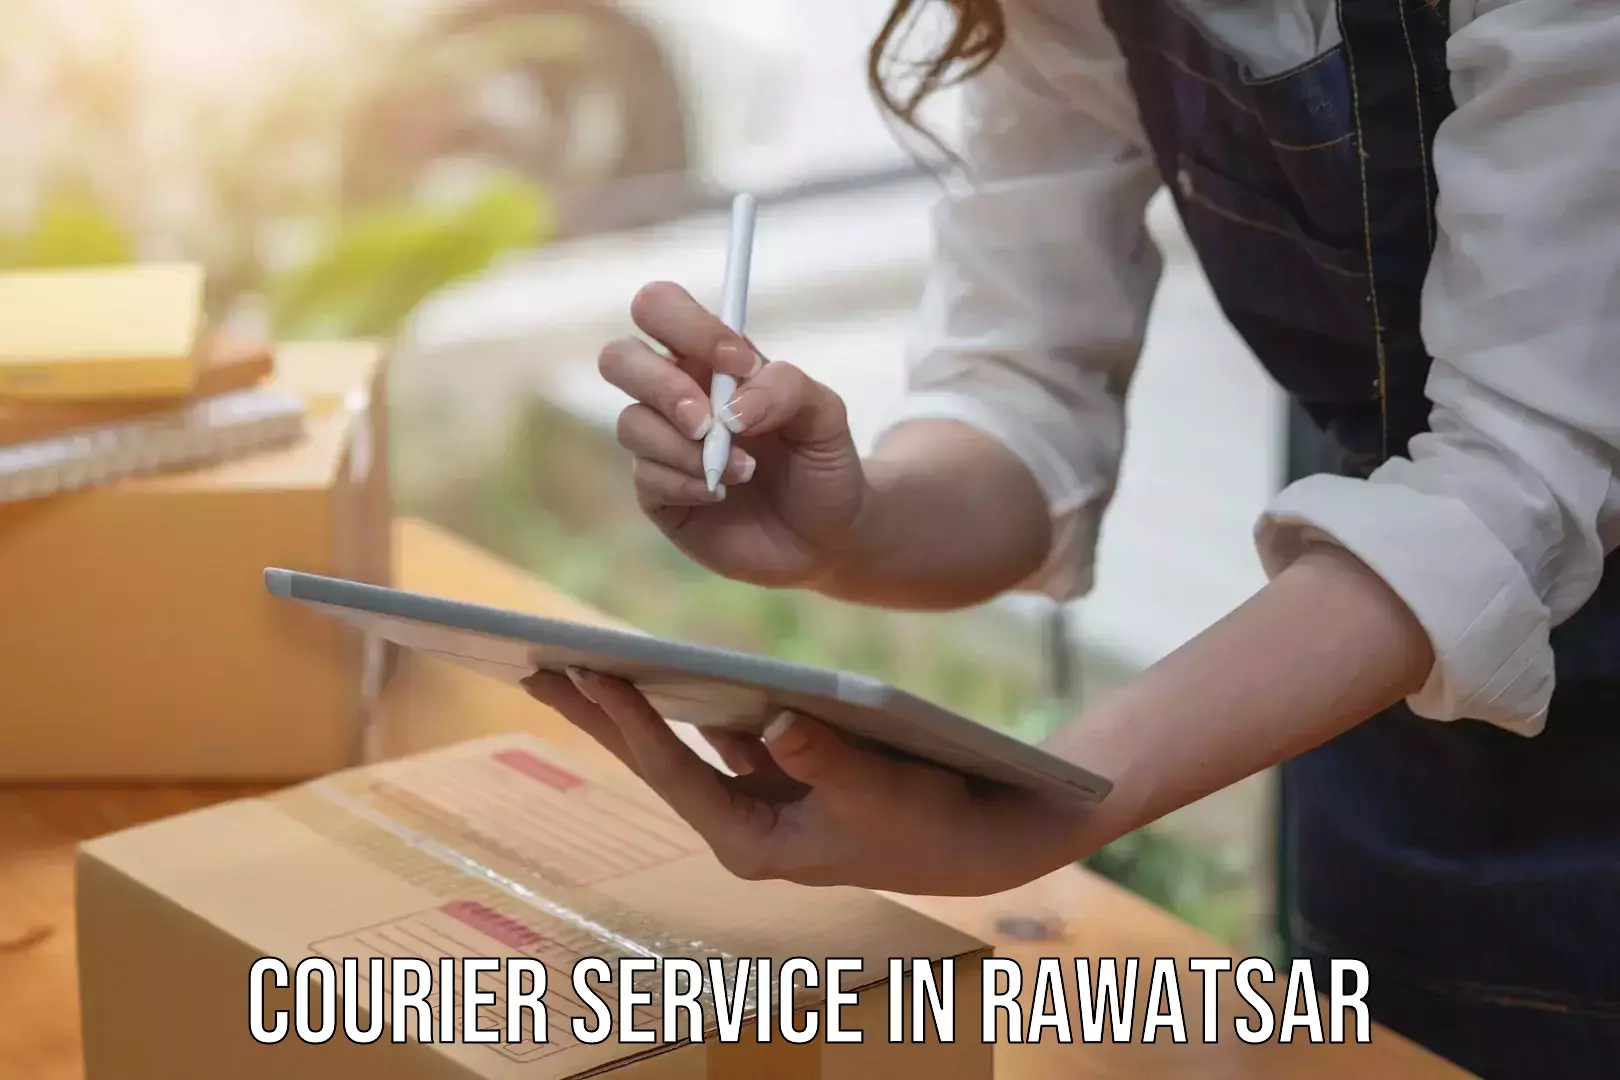 Customer-oriented courier services in Rawatsar